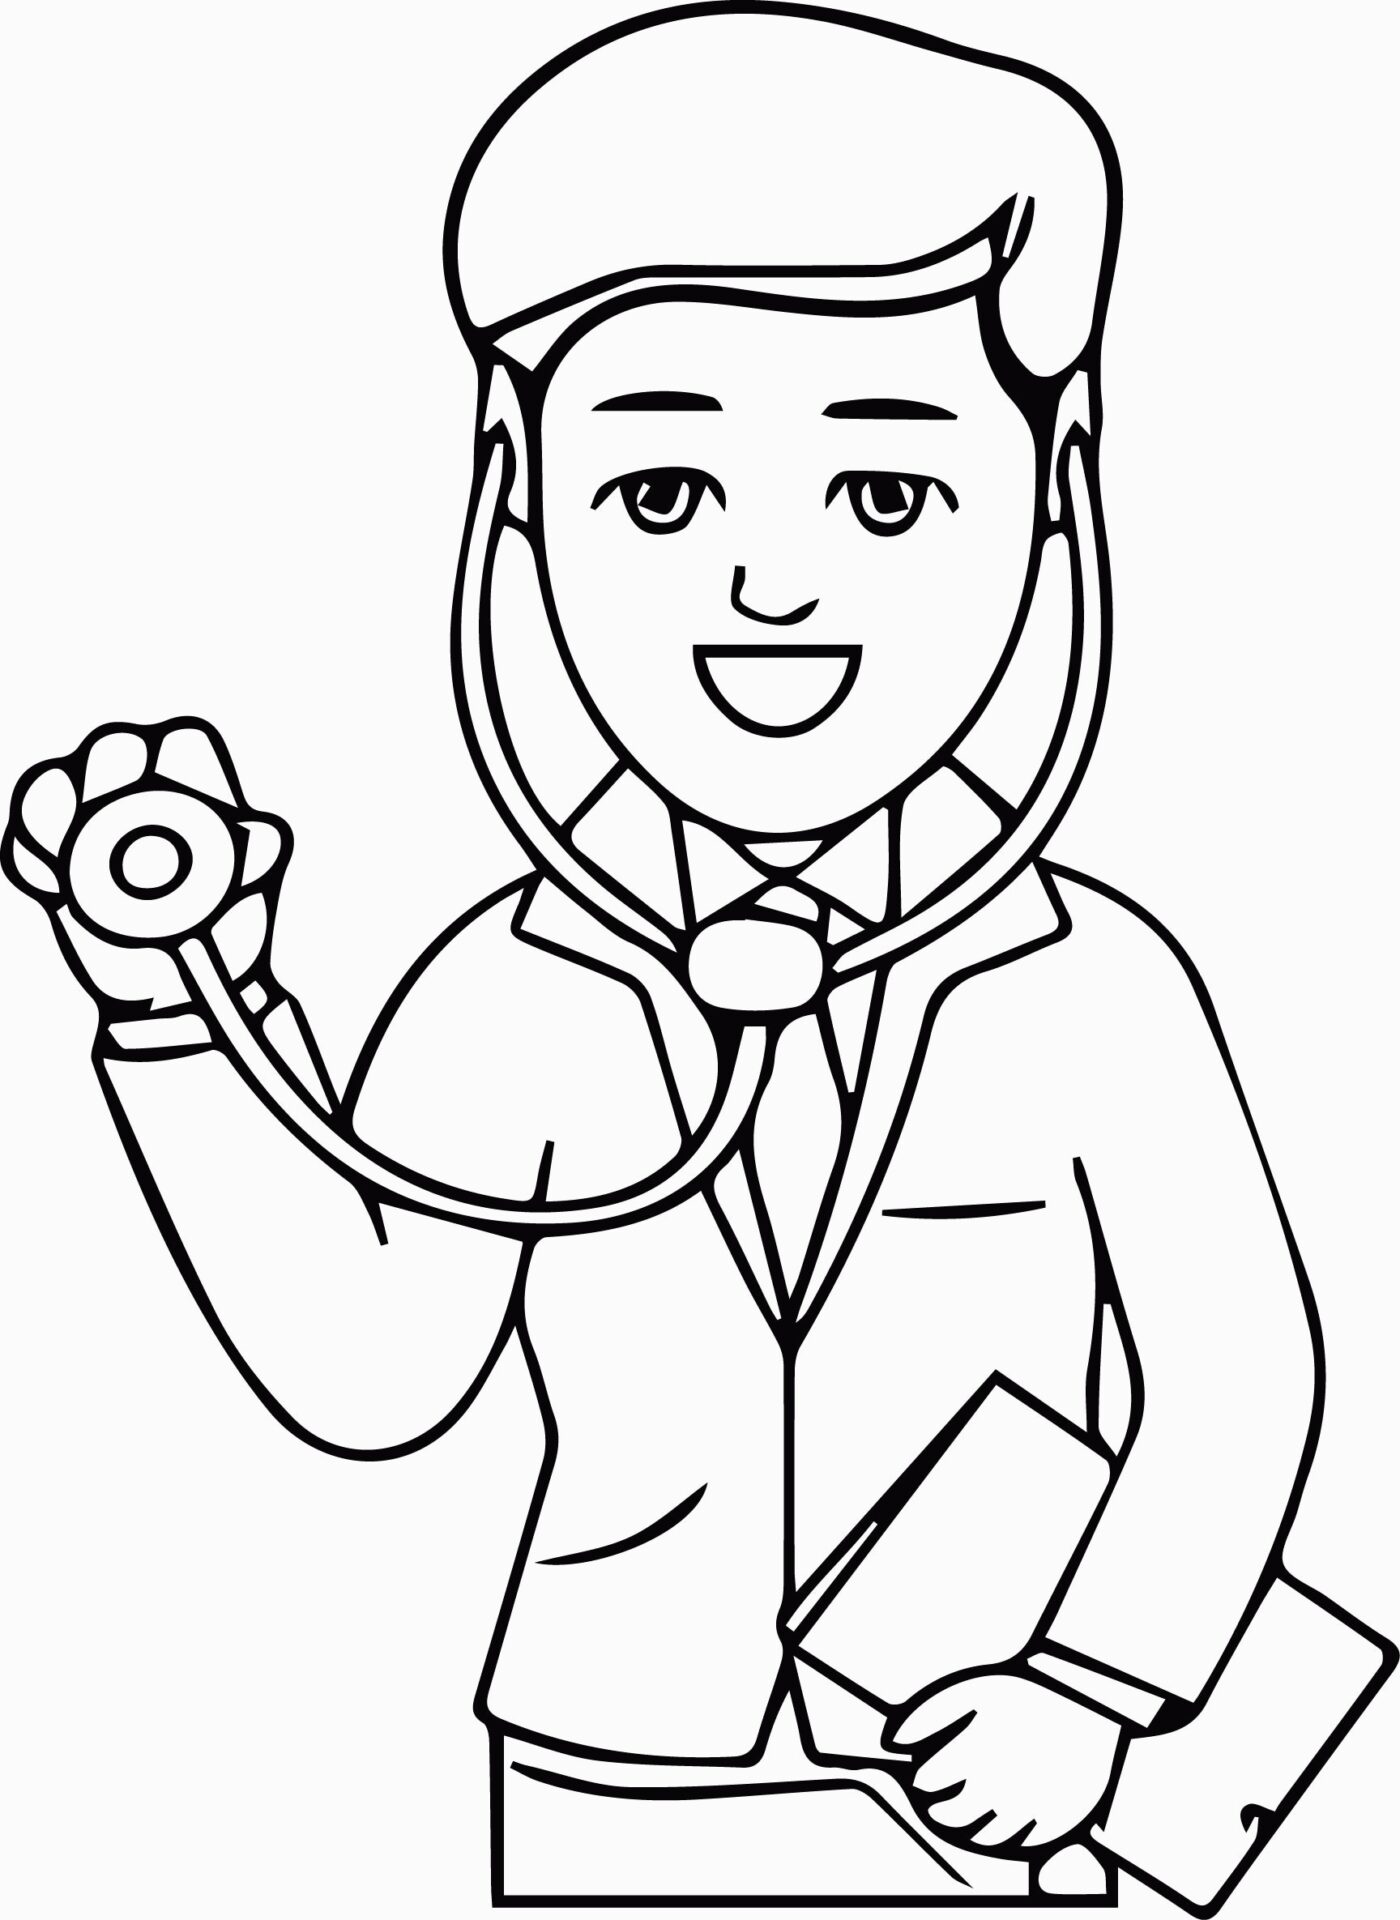 Pro Doctor Coloring Page - Free Printable Coloring Pages for Kids